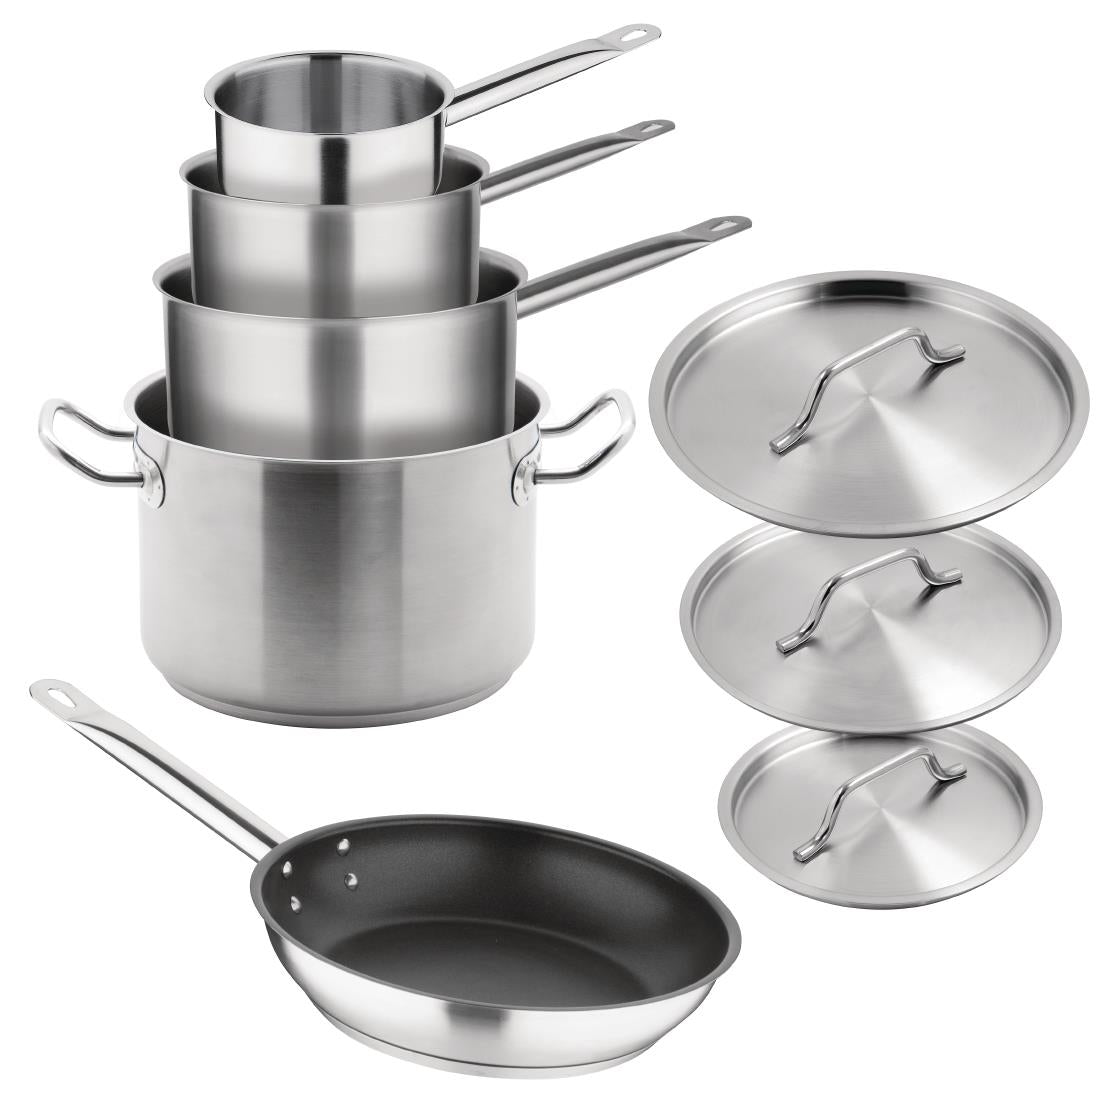 SA693 Vogue Cook Like A Pro 5-Piece Stainless Steel Induction Cookware Set